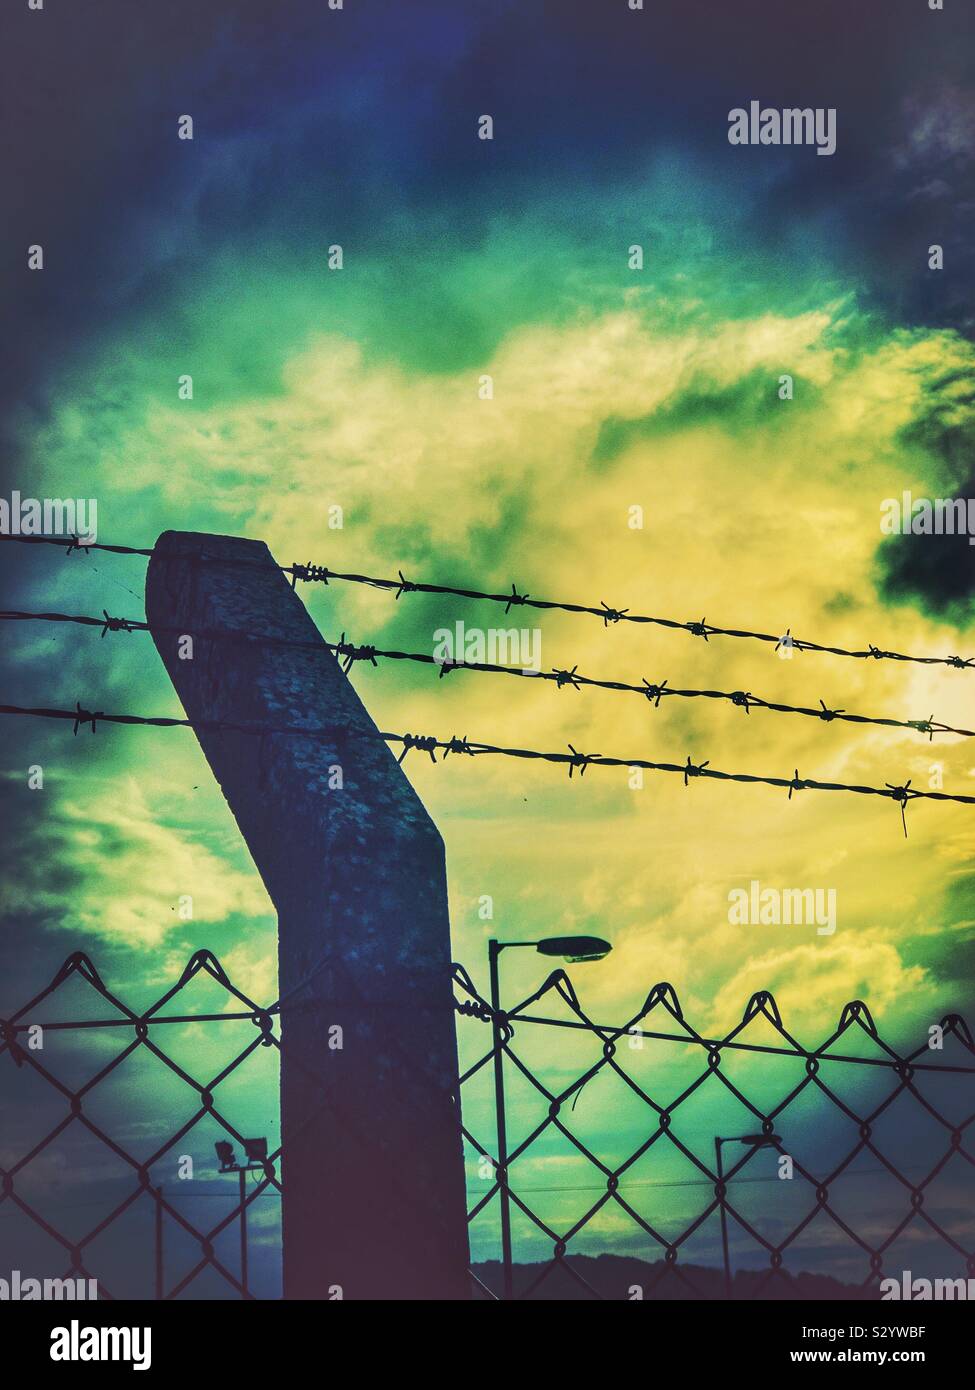 Concrete post with barbed wire and mesh fence against a dramatic cloudy sky. Stock Photo